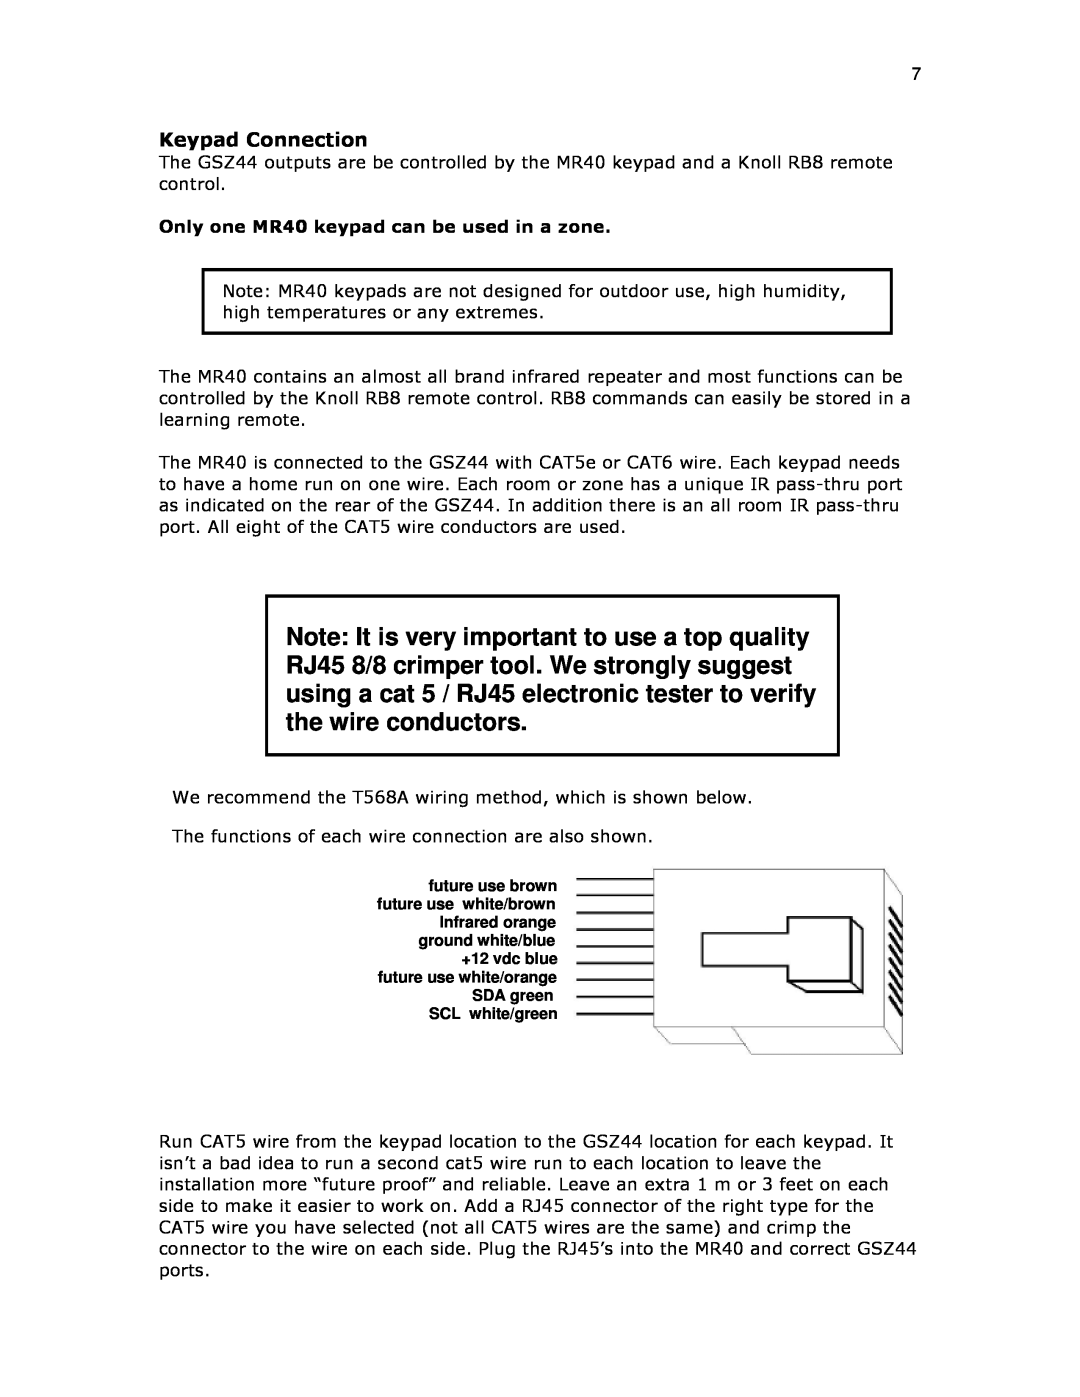 Knoll Systems GSZ44 installation instructions Keypad Connection 